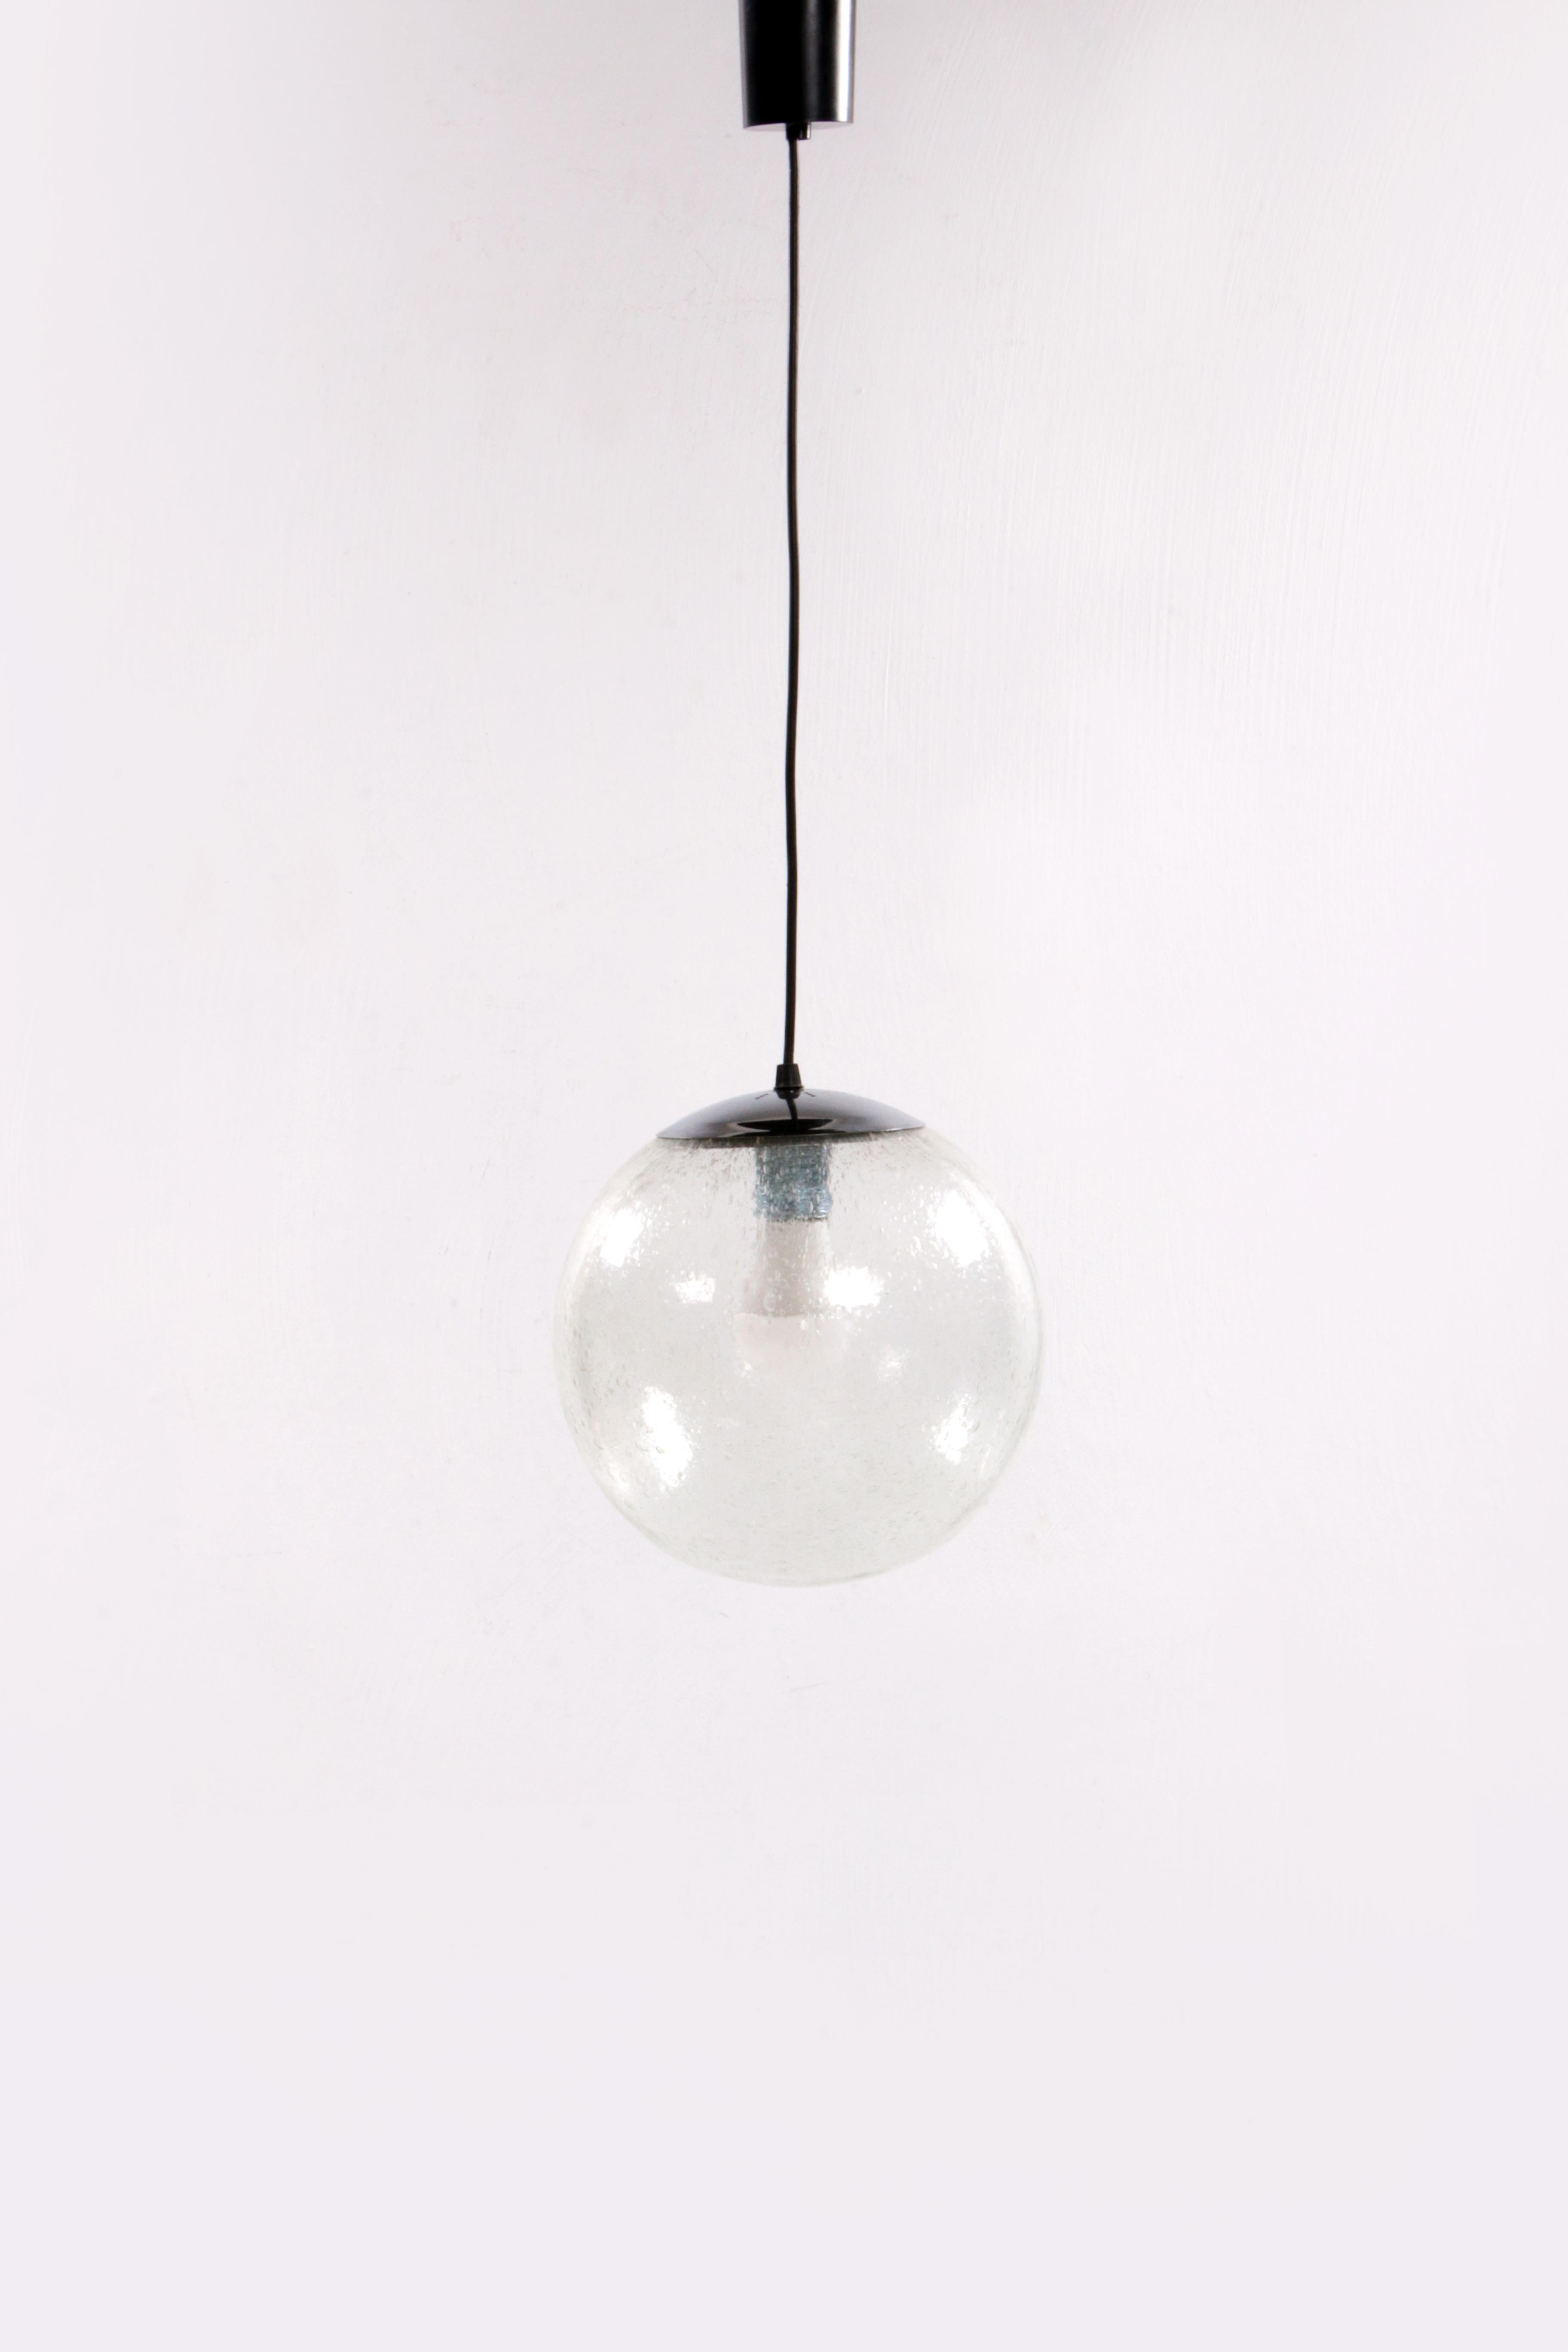 Large Glass Globe Hanging Lamp by Doria Leuchten, 1970s

A beautiful and stylish light object, fits perfectly in a sleek modern interior. The beautiful ice glass spreads the light in a special way.

The lamp comes from the 1970s, and was made by